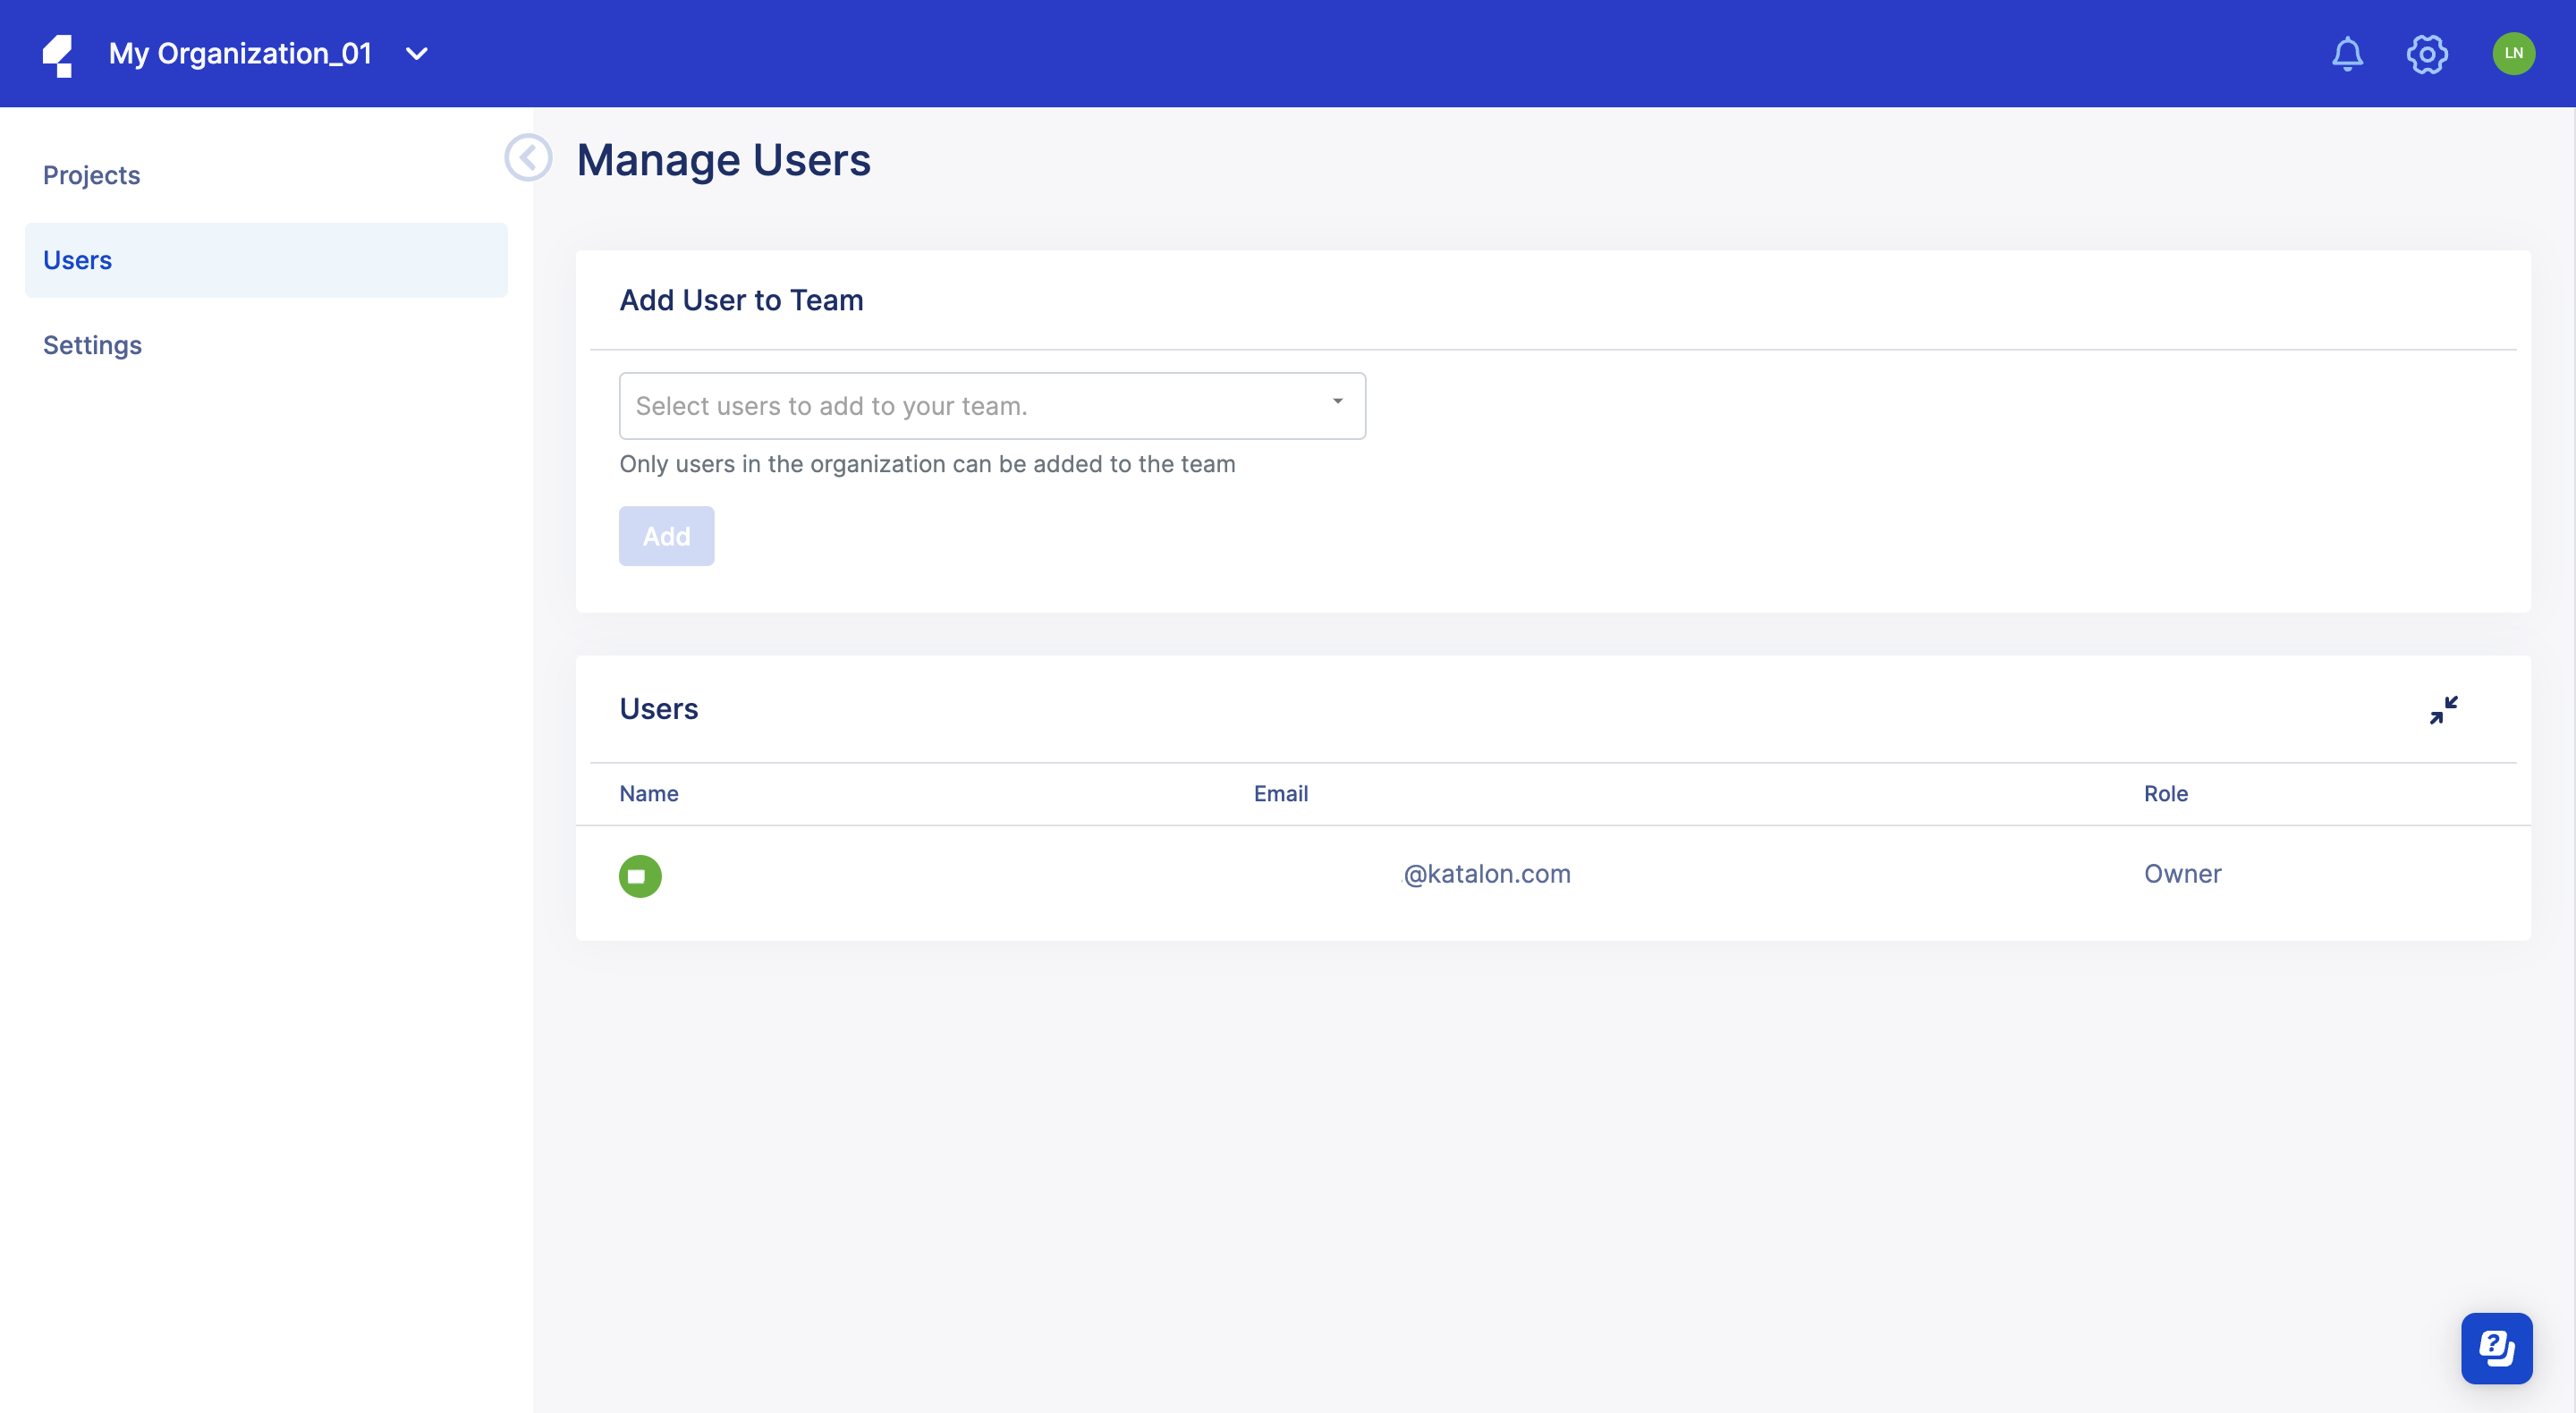 Manage Users page